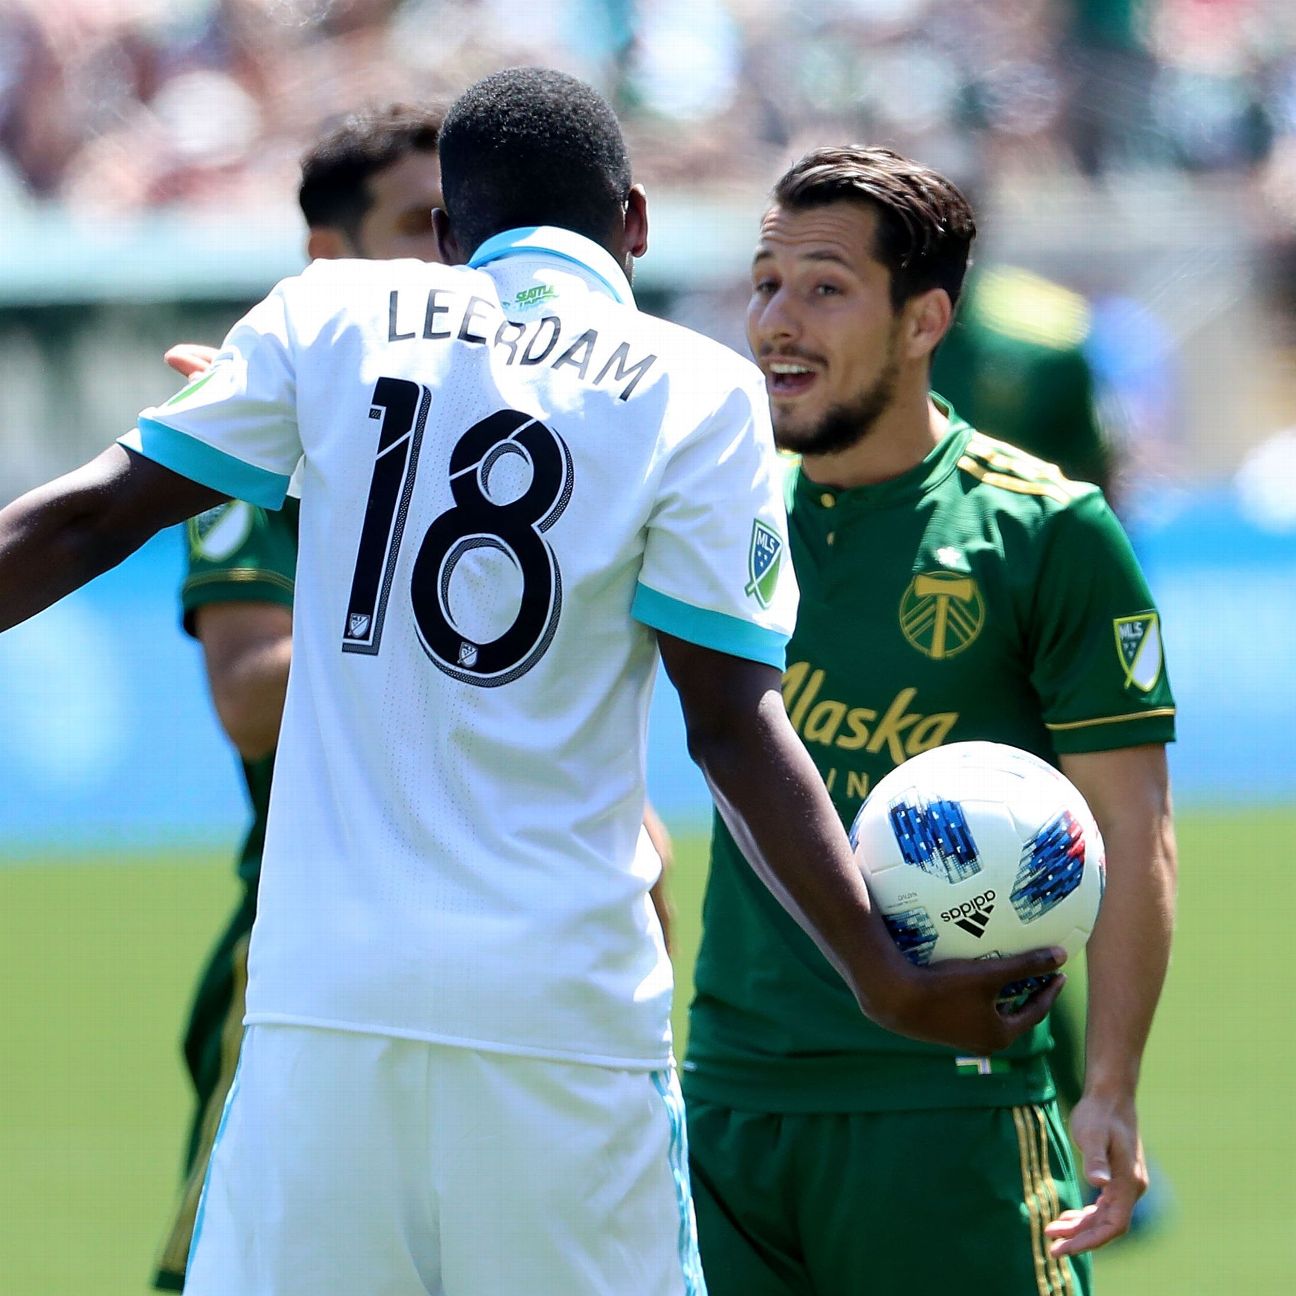 Timbers beat Sounders 1-0 in 100th rivalry meeting